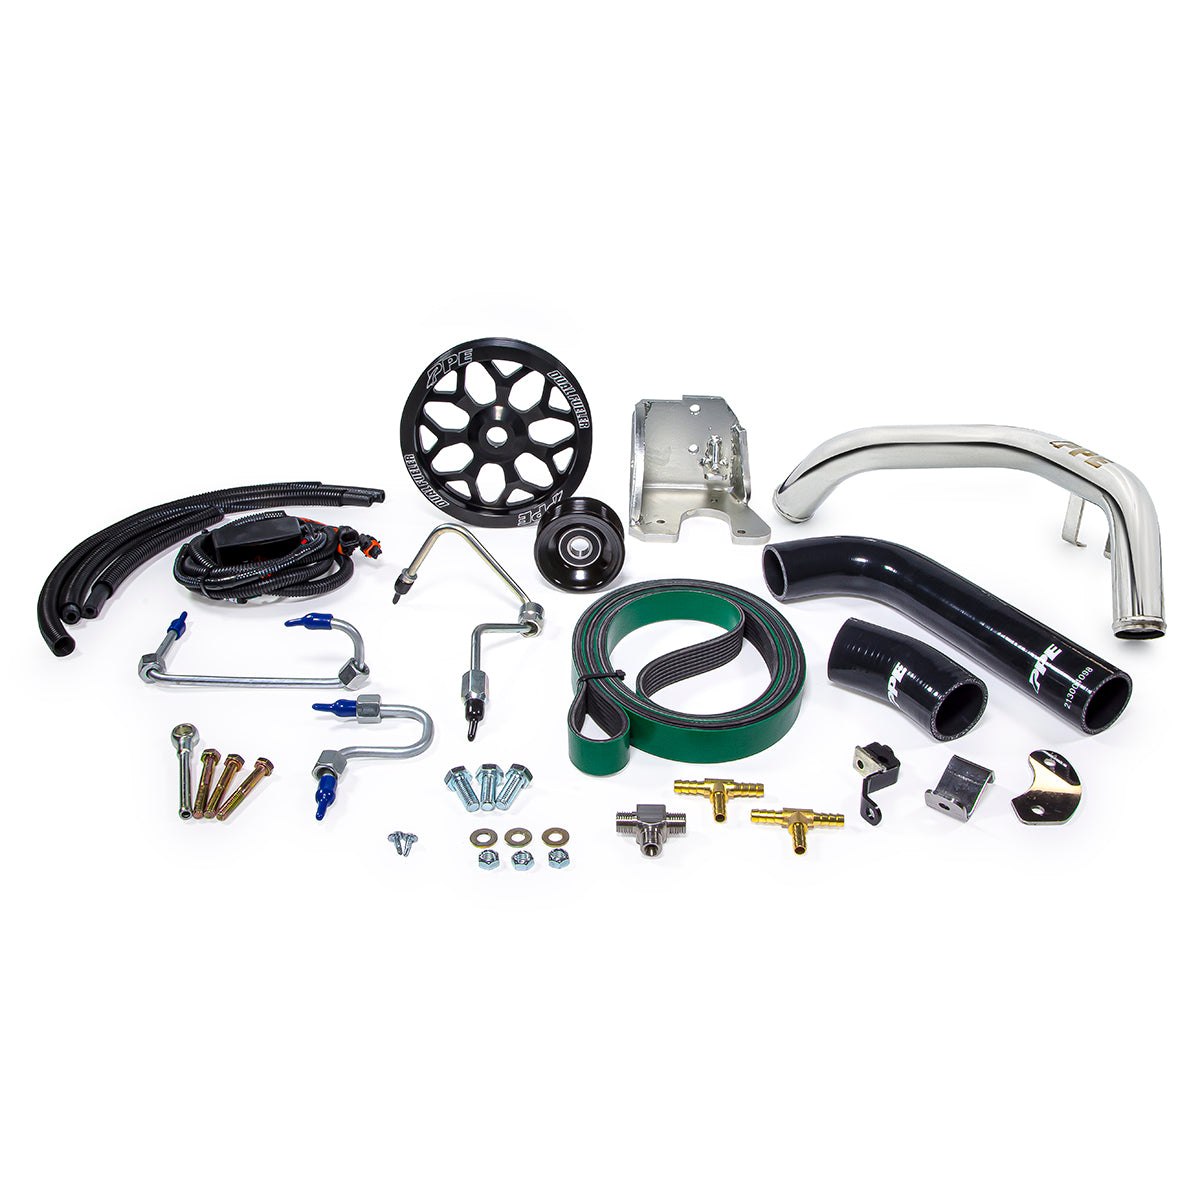 PPE Diesel 2007.5-2012 RAM 2500/3500 6.7L Dual Fueler Installation Kit without Pump (Built To Order) 213003000